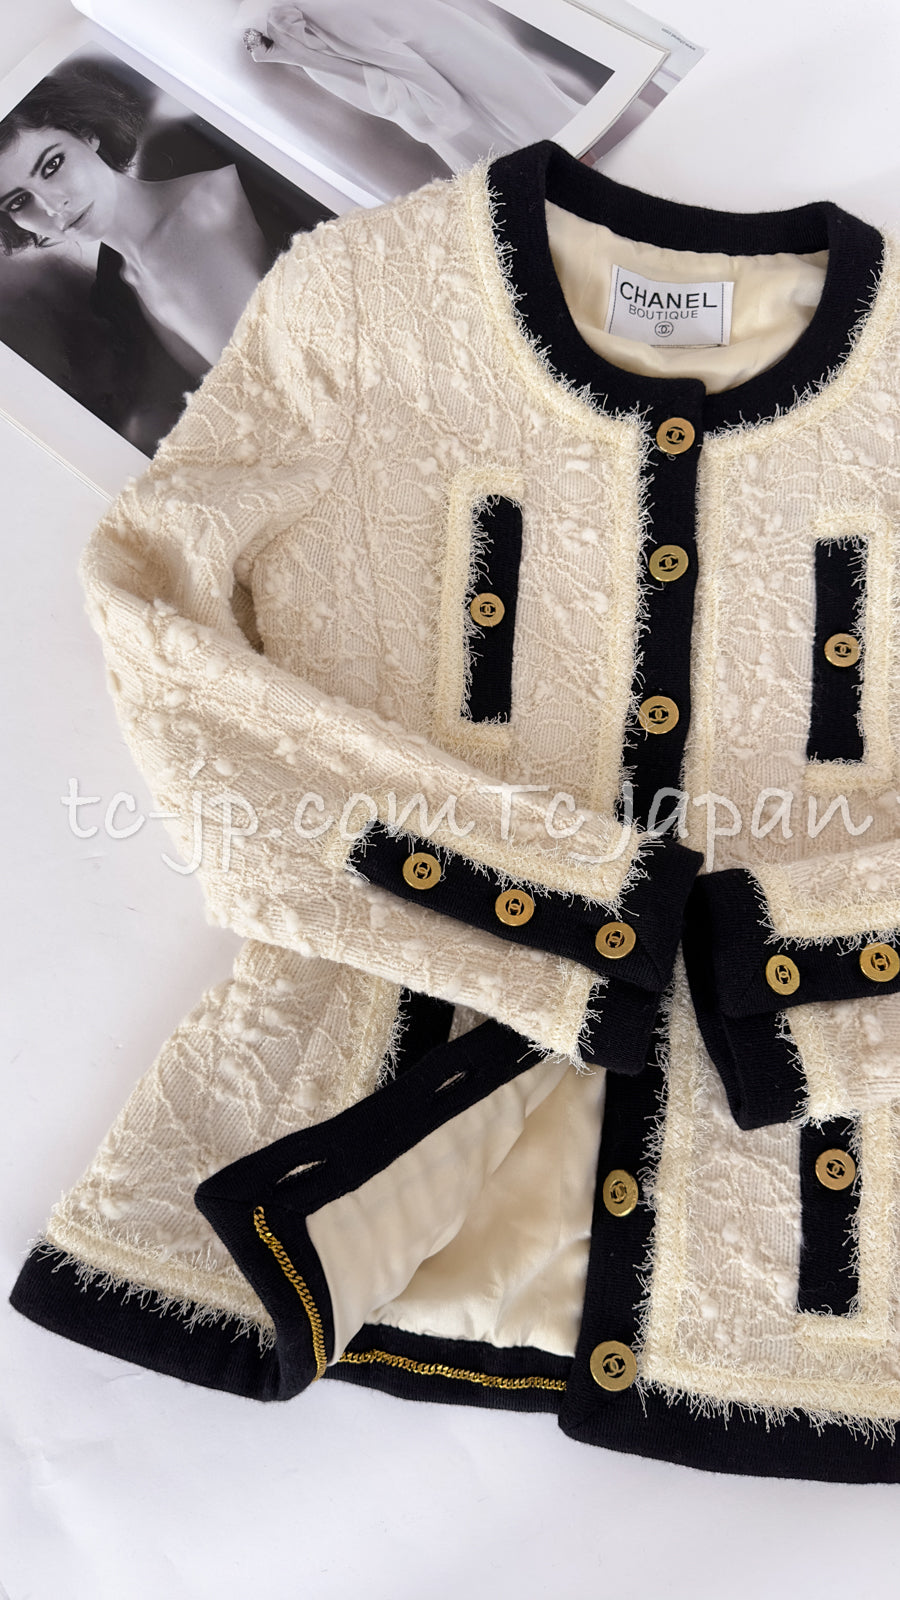 CHANEL 94A An Extremely Rare Collectible Signature Boucle Creme Ivory Black Trim Vintage Jacket 34 36 38 40 シャネル スーパーモデルの幻 ヴィンテージ・ブークレ・クリーム・アイボリー・ブラック・トリム・ジャケット 即発